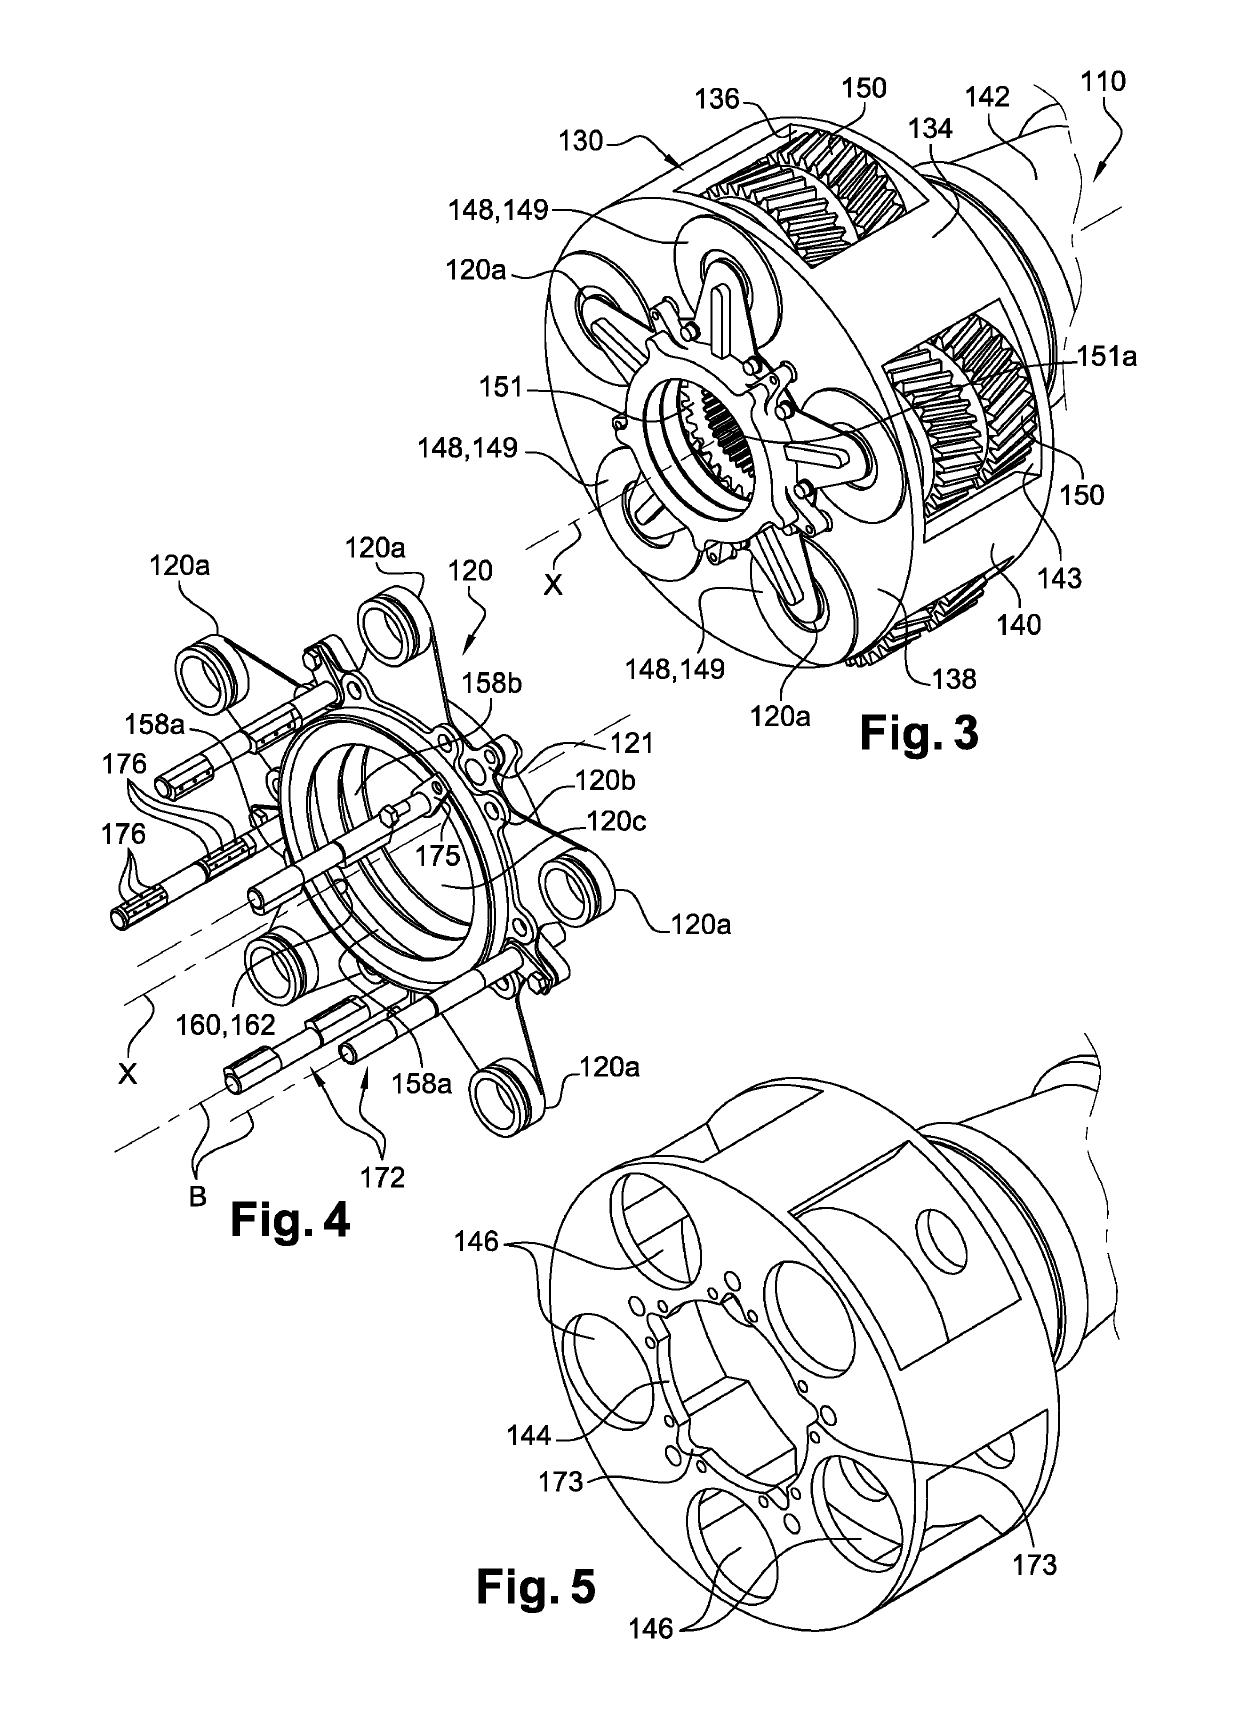 Planetary reduction gear ring gear for a turbine engine